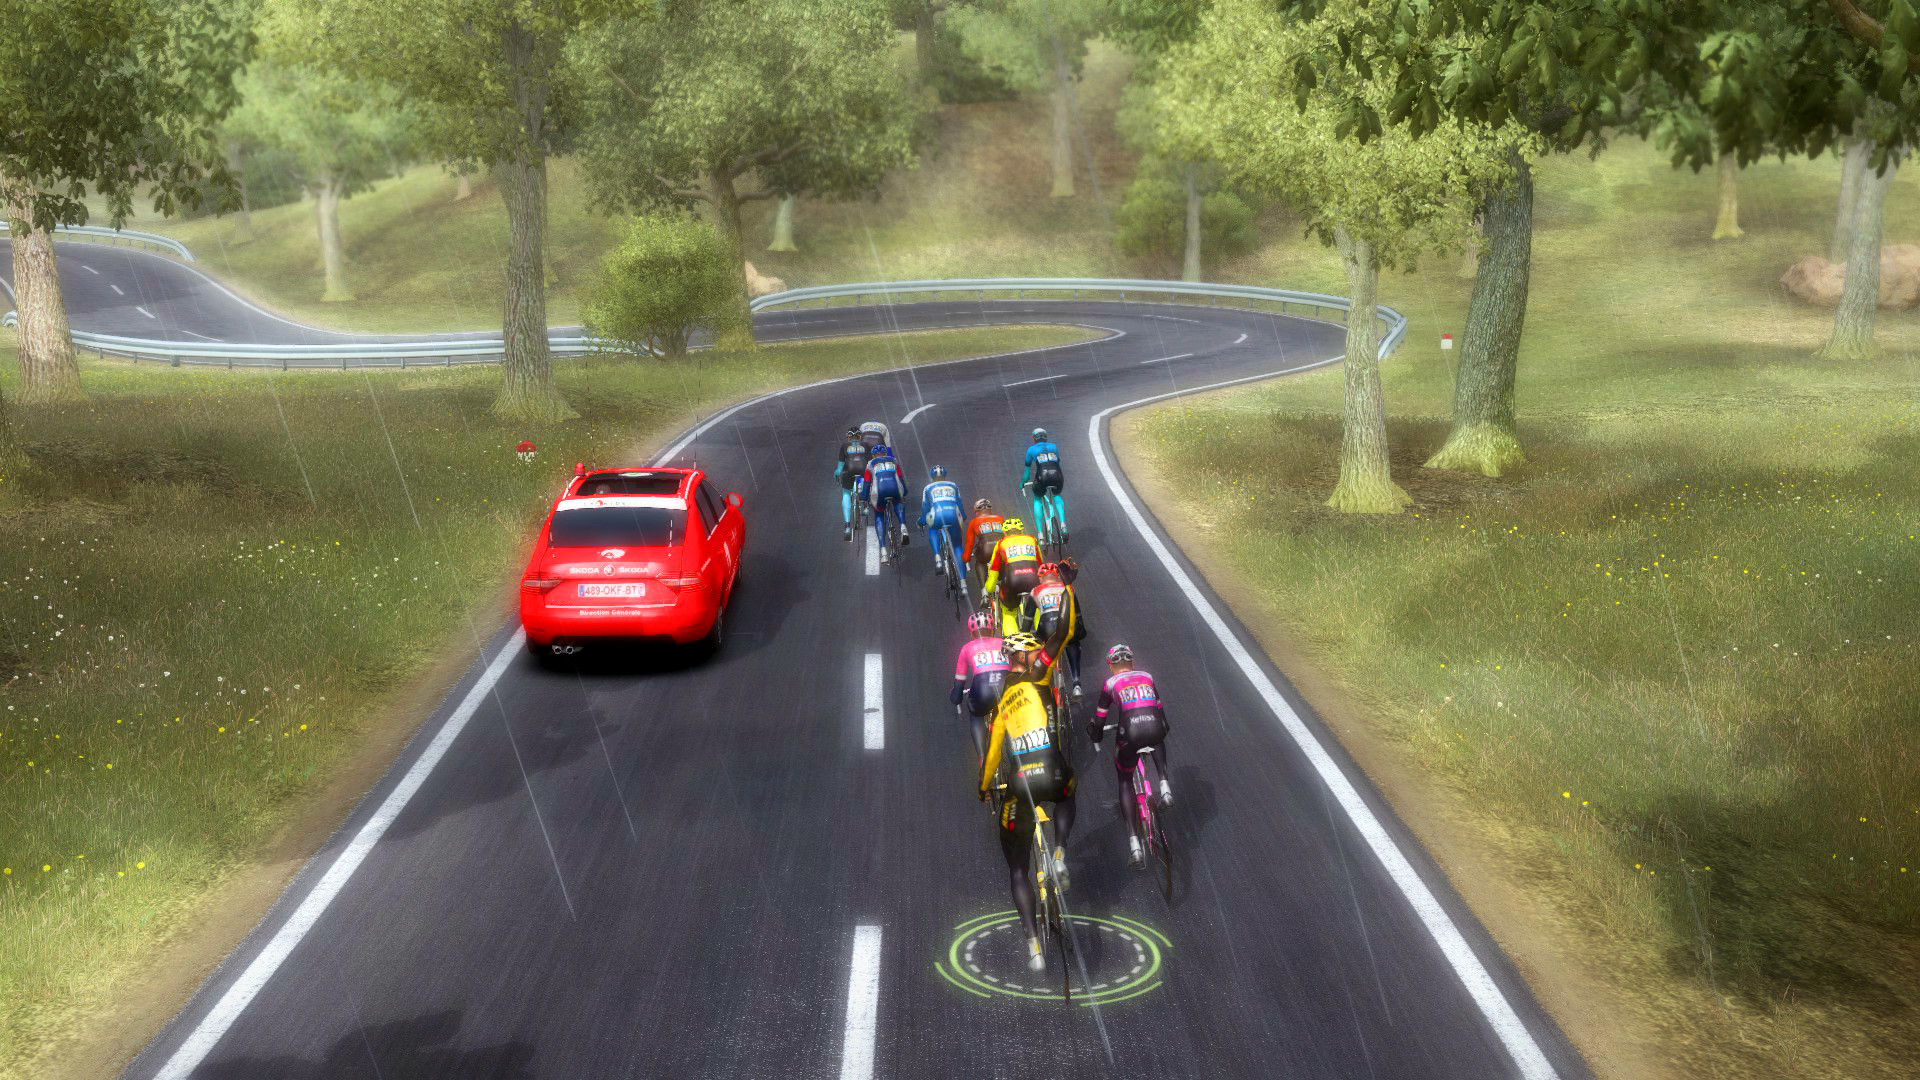 Pro cycling manager 2012 download bittorrent software soft cell discography bittorrent sync